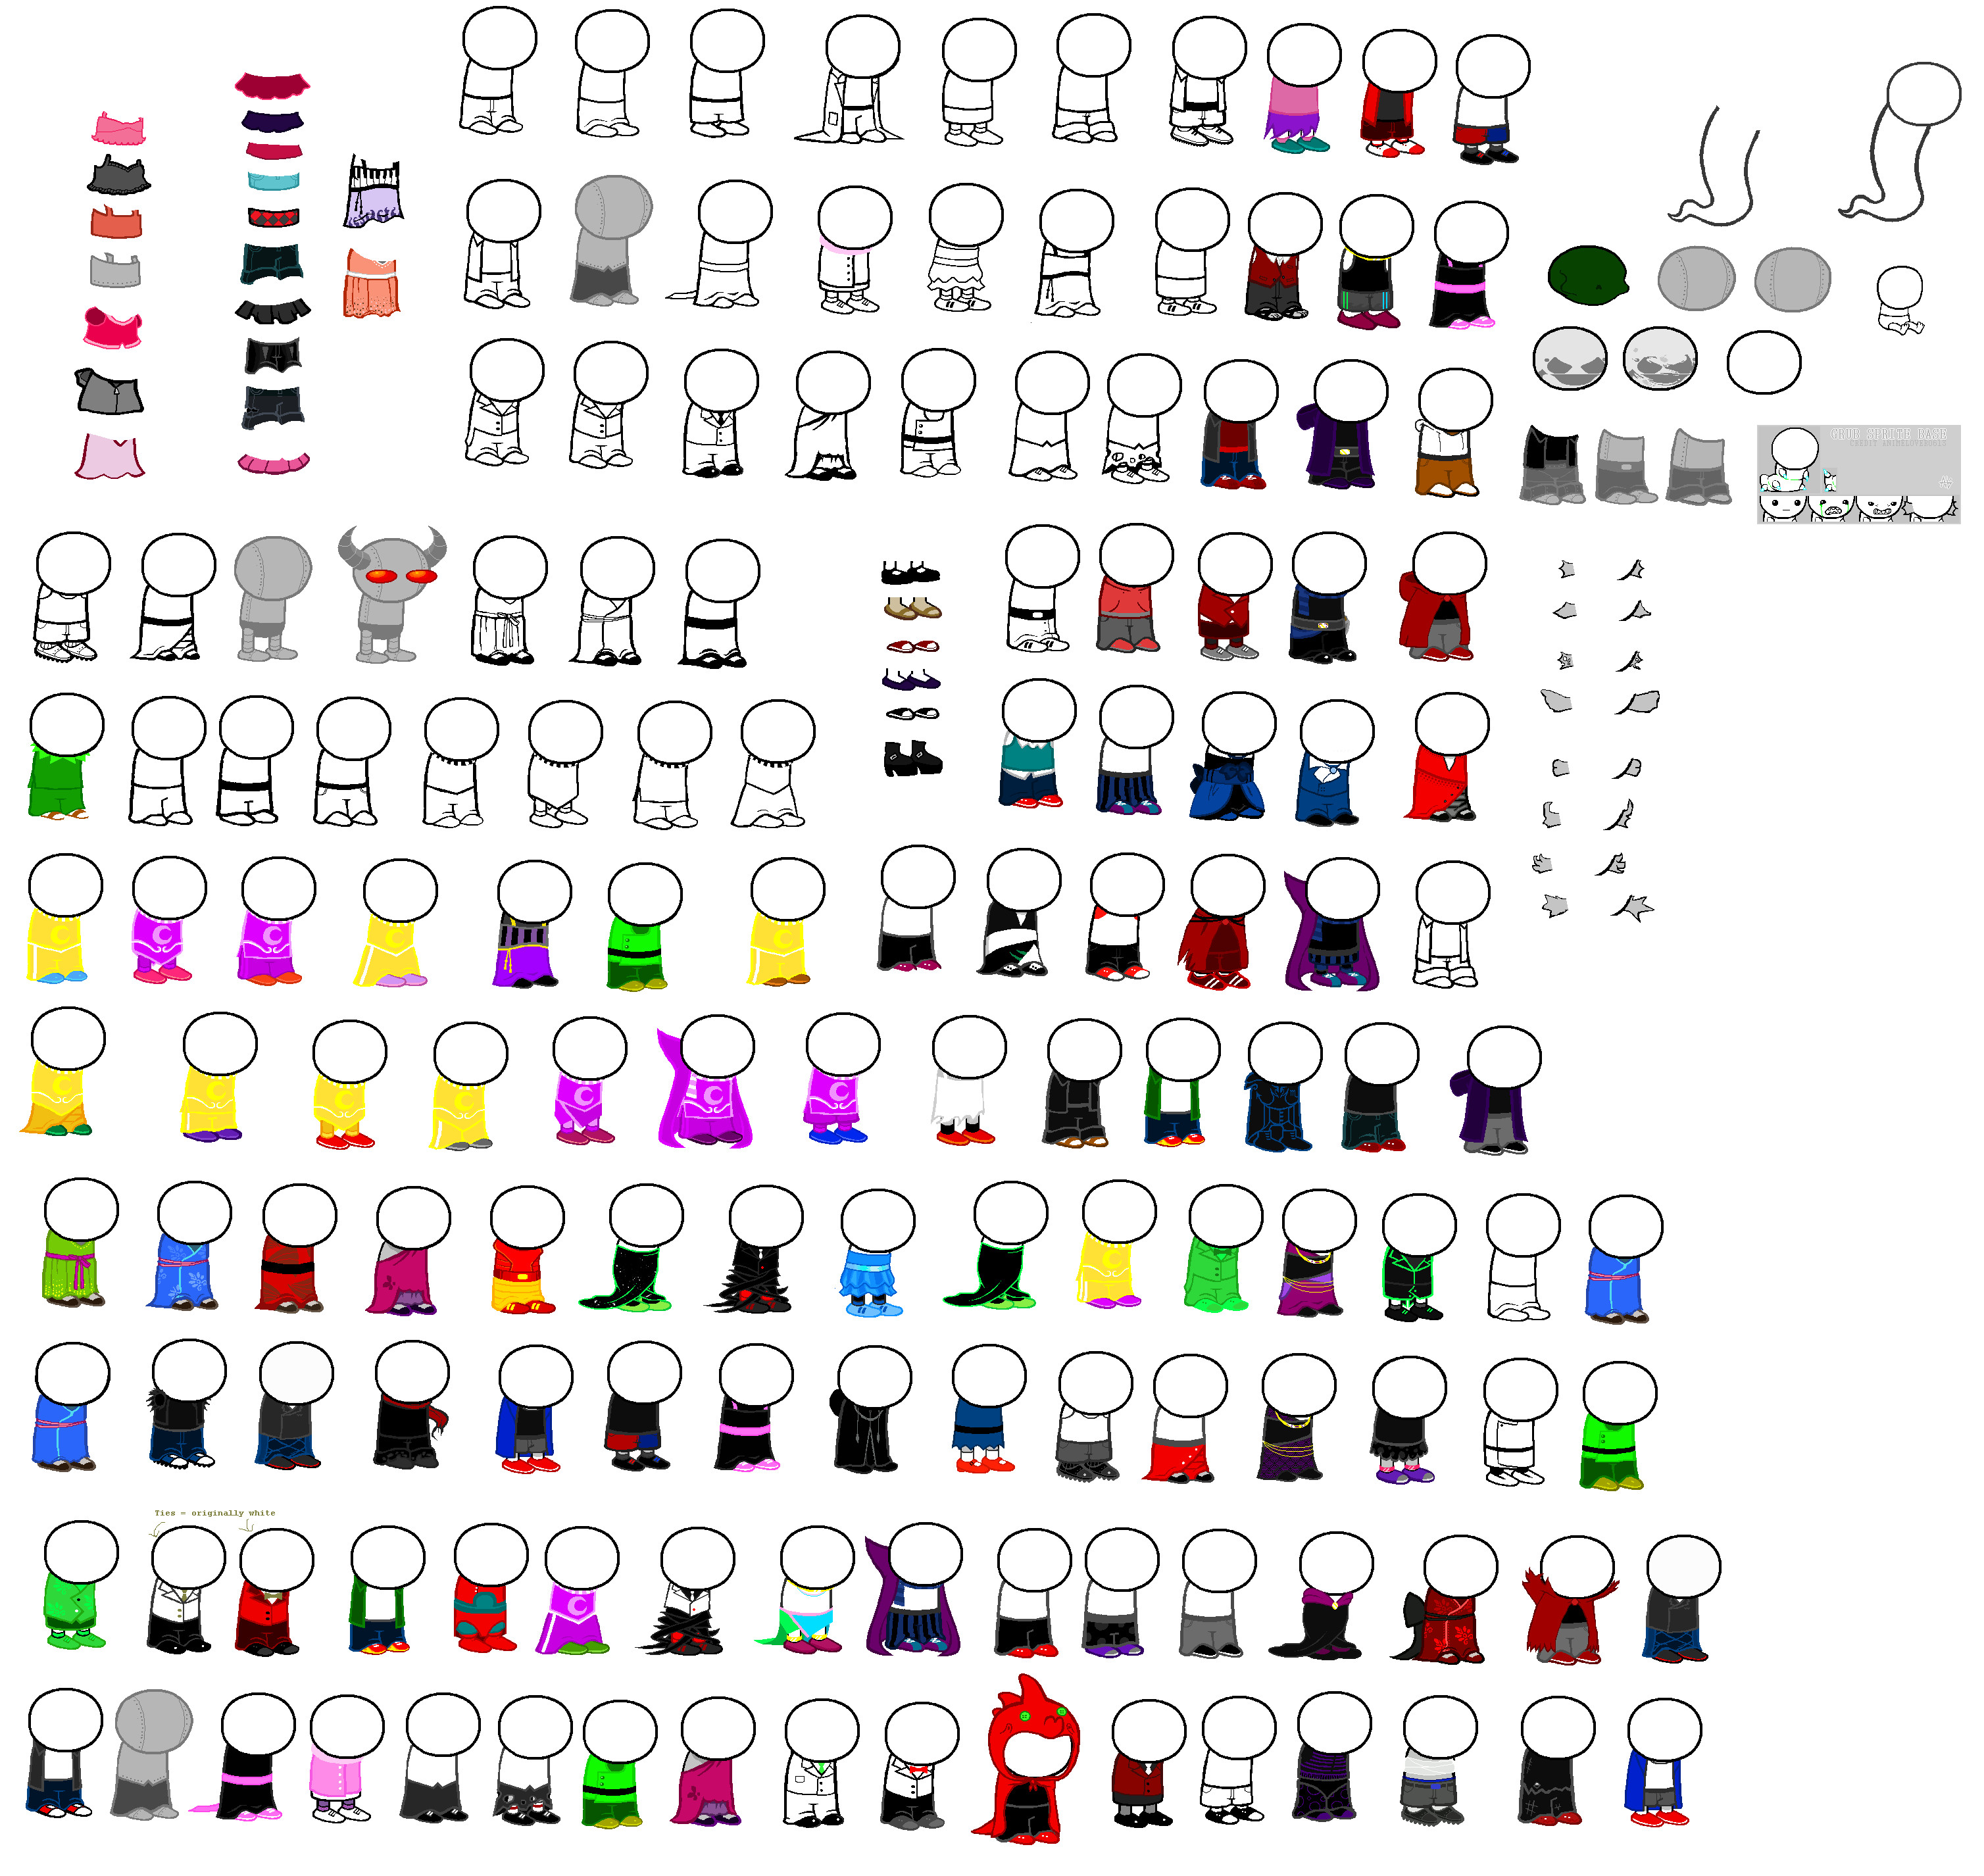 Homestuck Sprite Template Homestuck Clothes Plus Bases Sprite Sheet by Blahjerry On